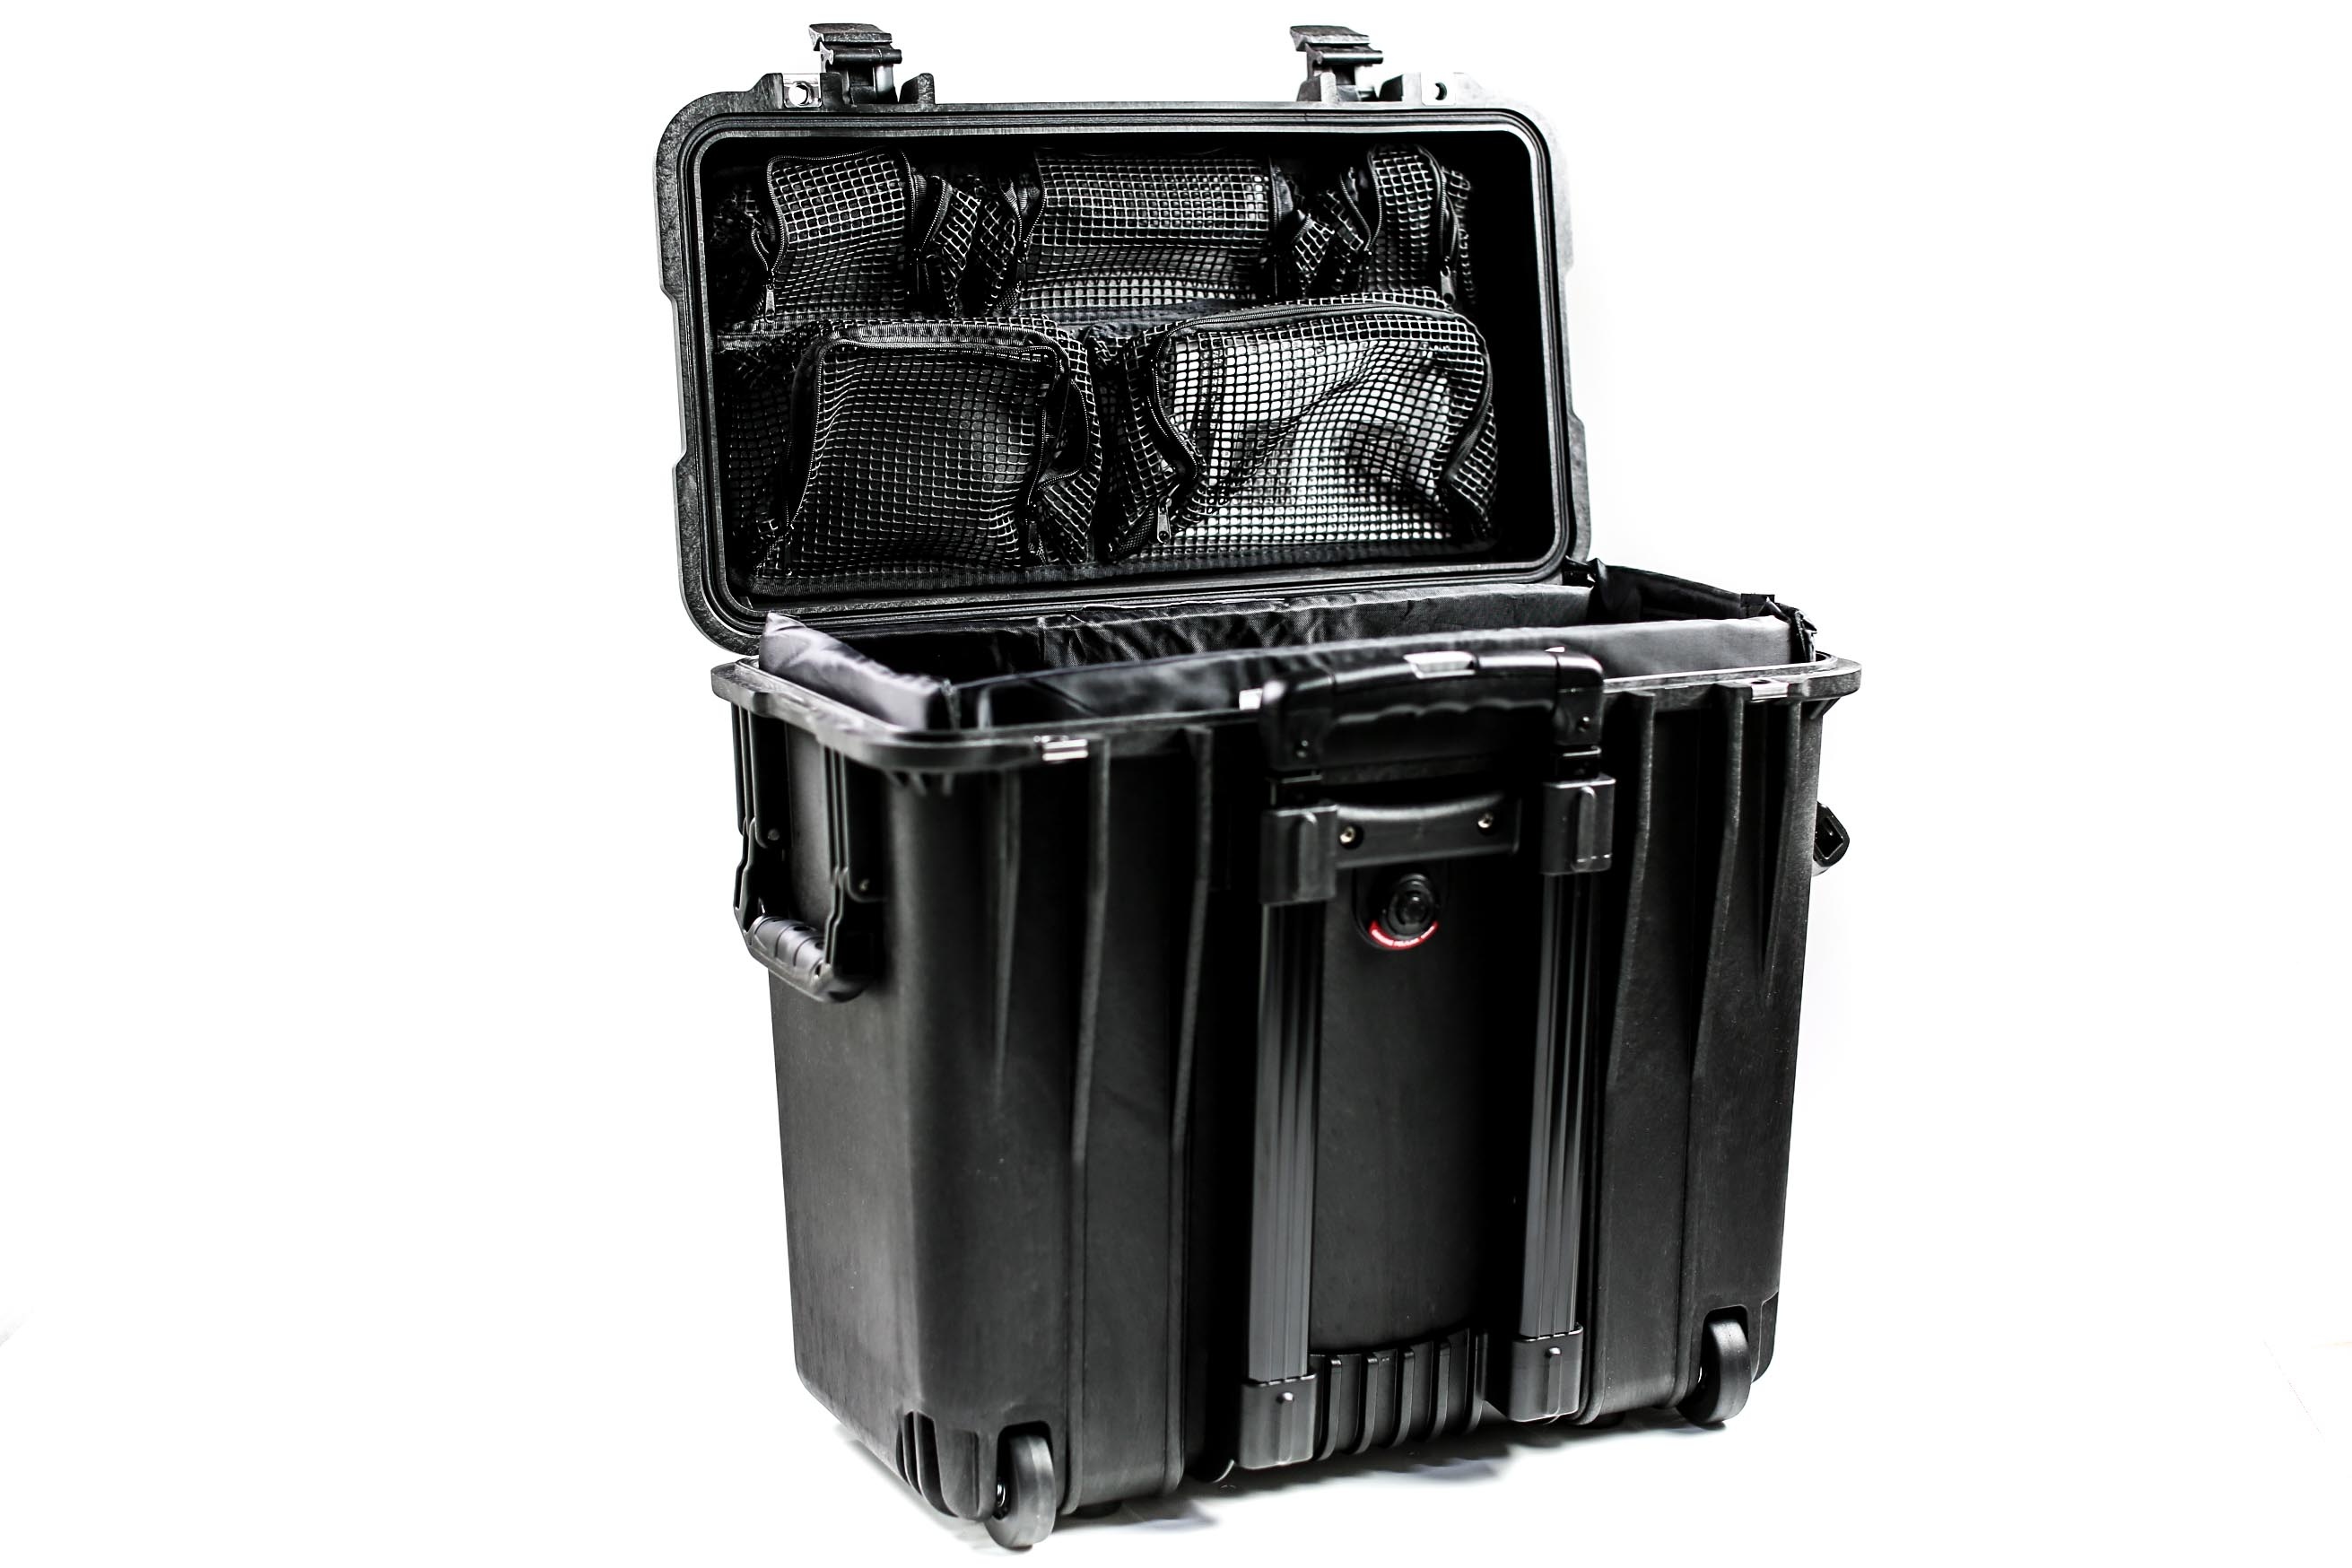 Pelican 1444 Top Loader Case with Photo Dividers (Black)